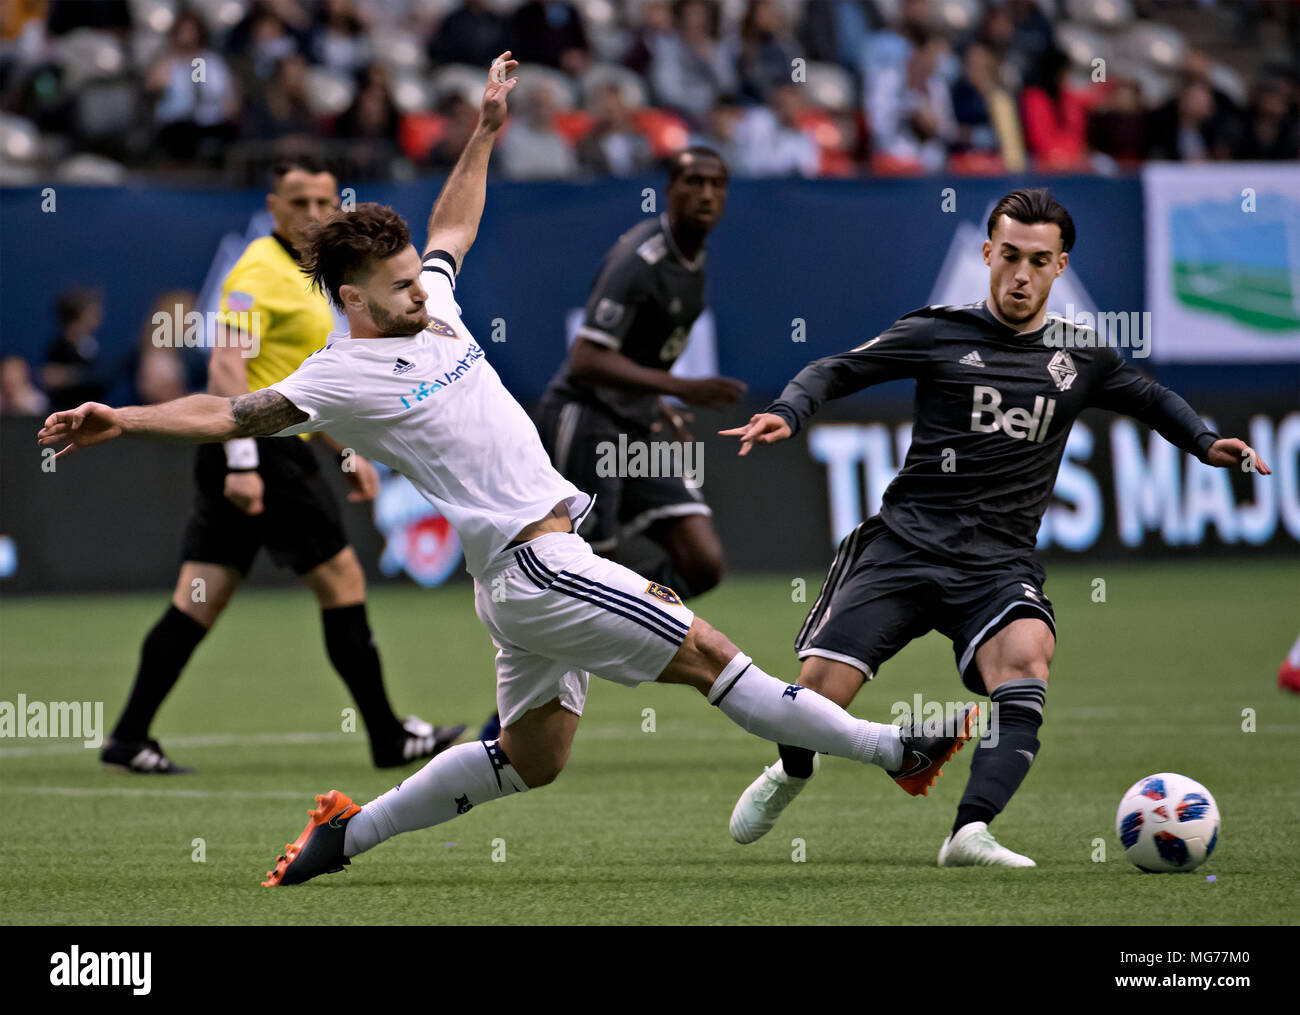 Vancouver, Canada. 27th Apr, 2018. Real Salt Lake's Kyle Beckerman (L) vies with Vancouver Whitecaps' Russell Tiebert during the Major League Soccer (MLS) regular season soccer match between Vancouver Whitecaps and Real Salt Lake in Vancouver, Canada, on April 27, 2018. Credit: Andrew Soong/Xinhua/Alamy Live News Stock Photo